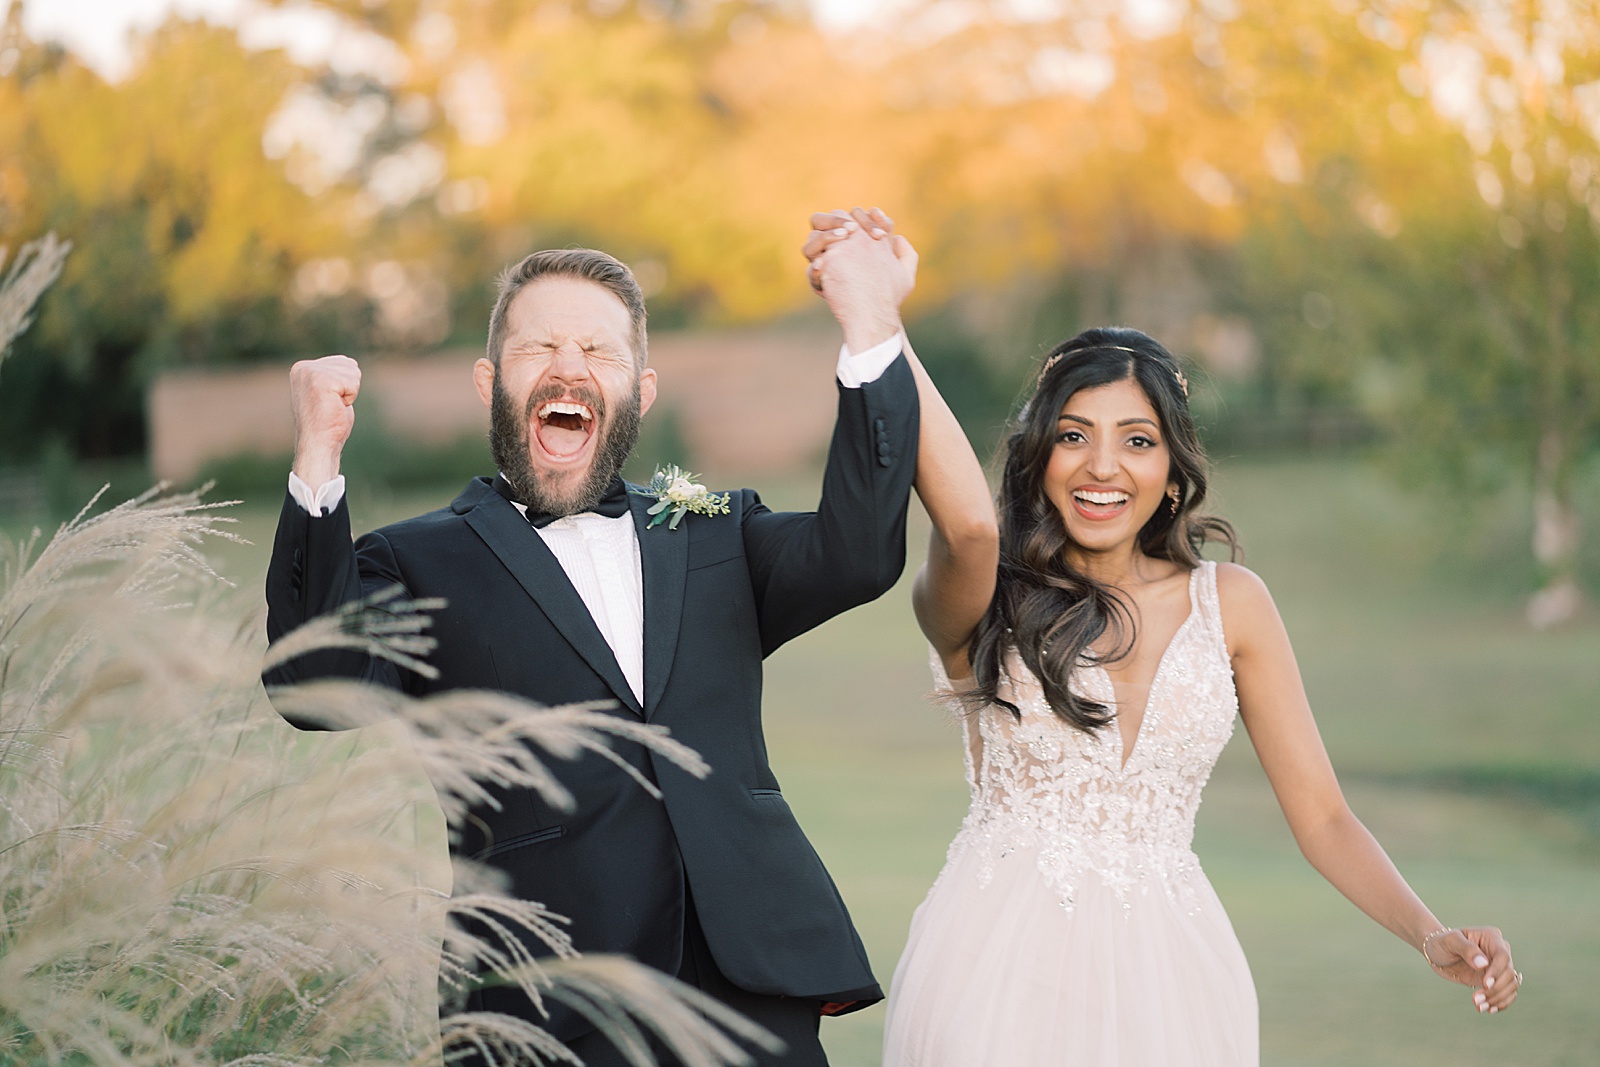 Newlywed bride and groom cheer while holding hands after being married, posing for wedding photos with Paige Vaughn Photography